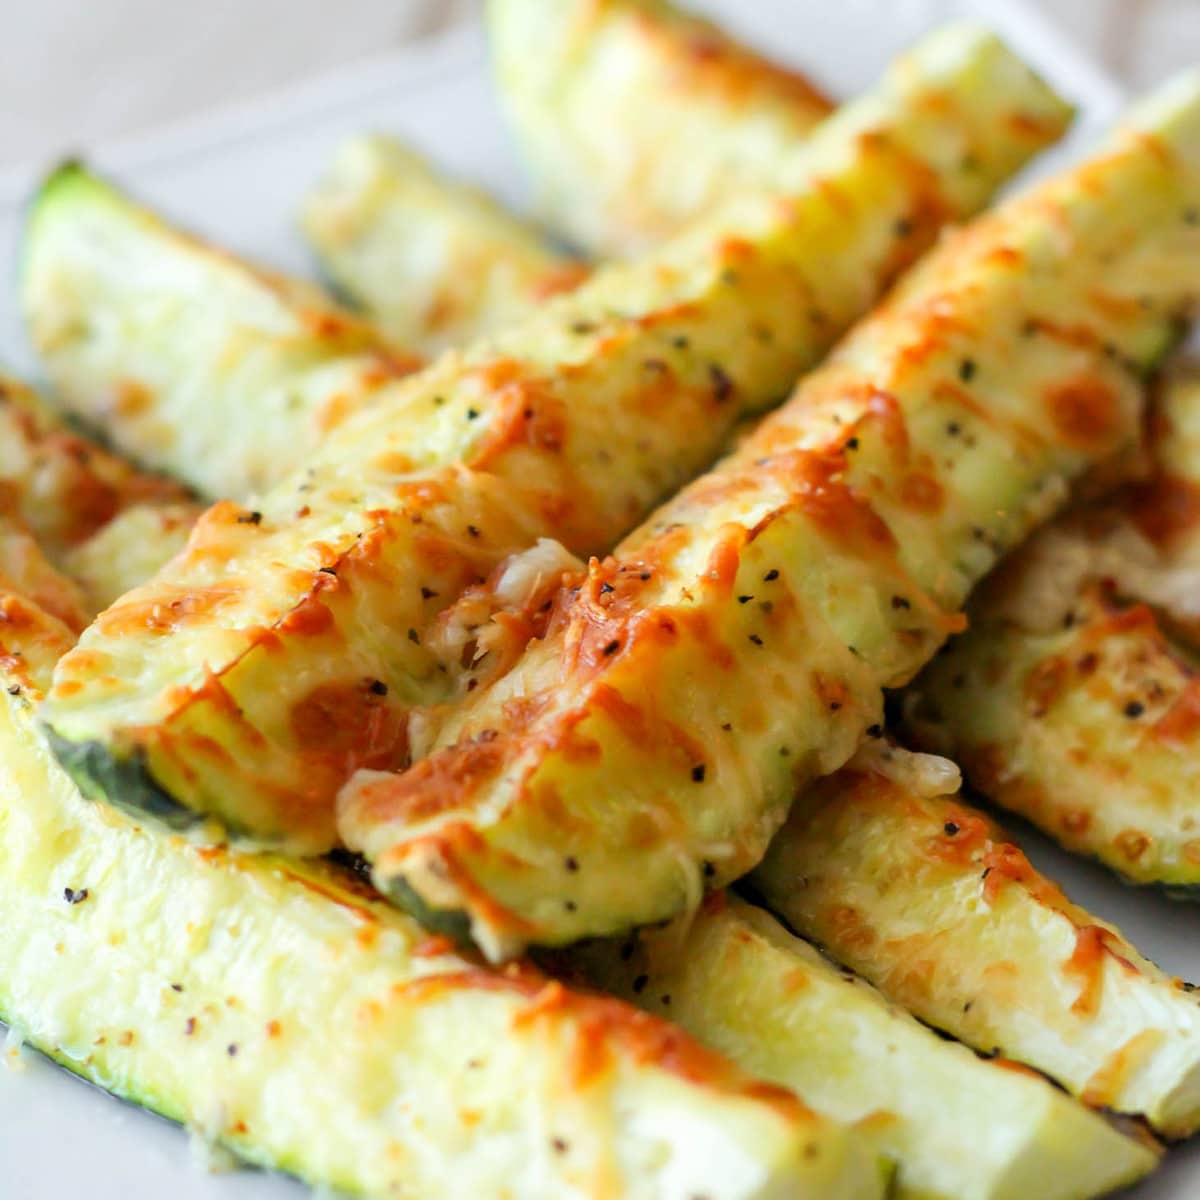 Halloween dinner ideas - parmesan crusted zucchini piled on a plate.